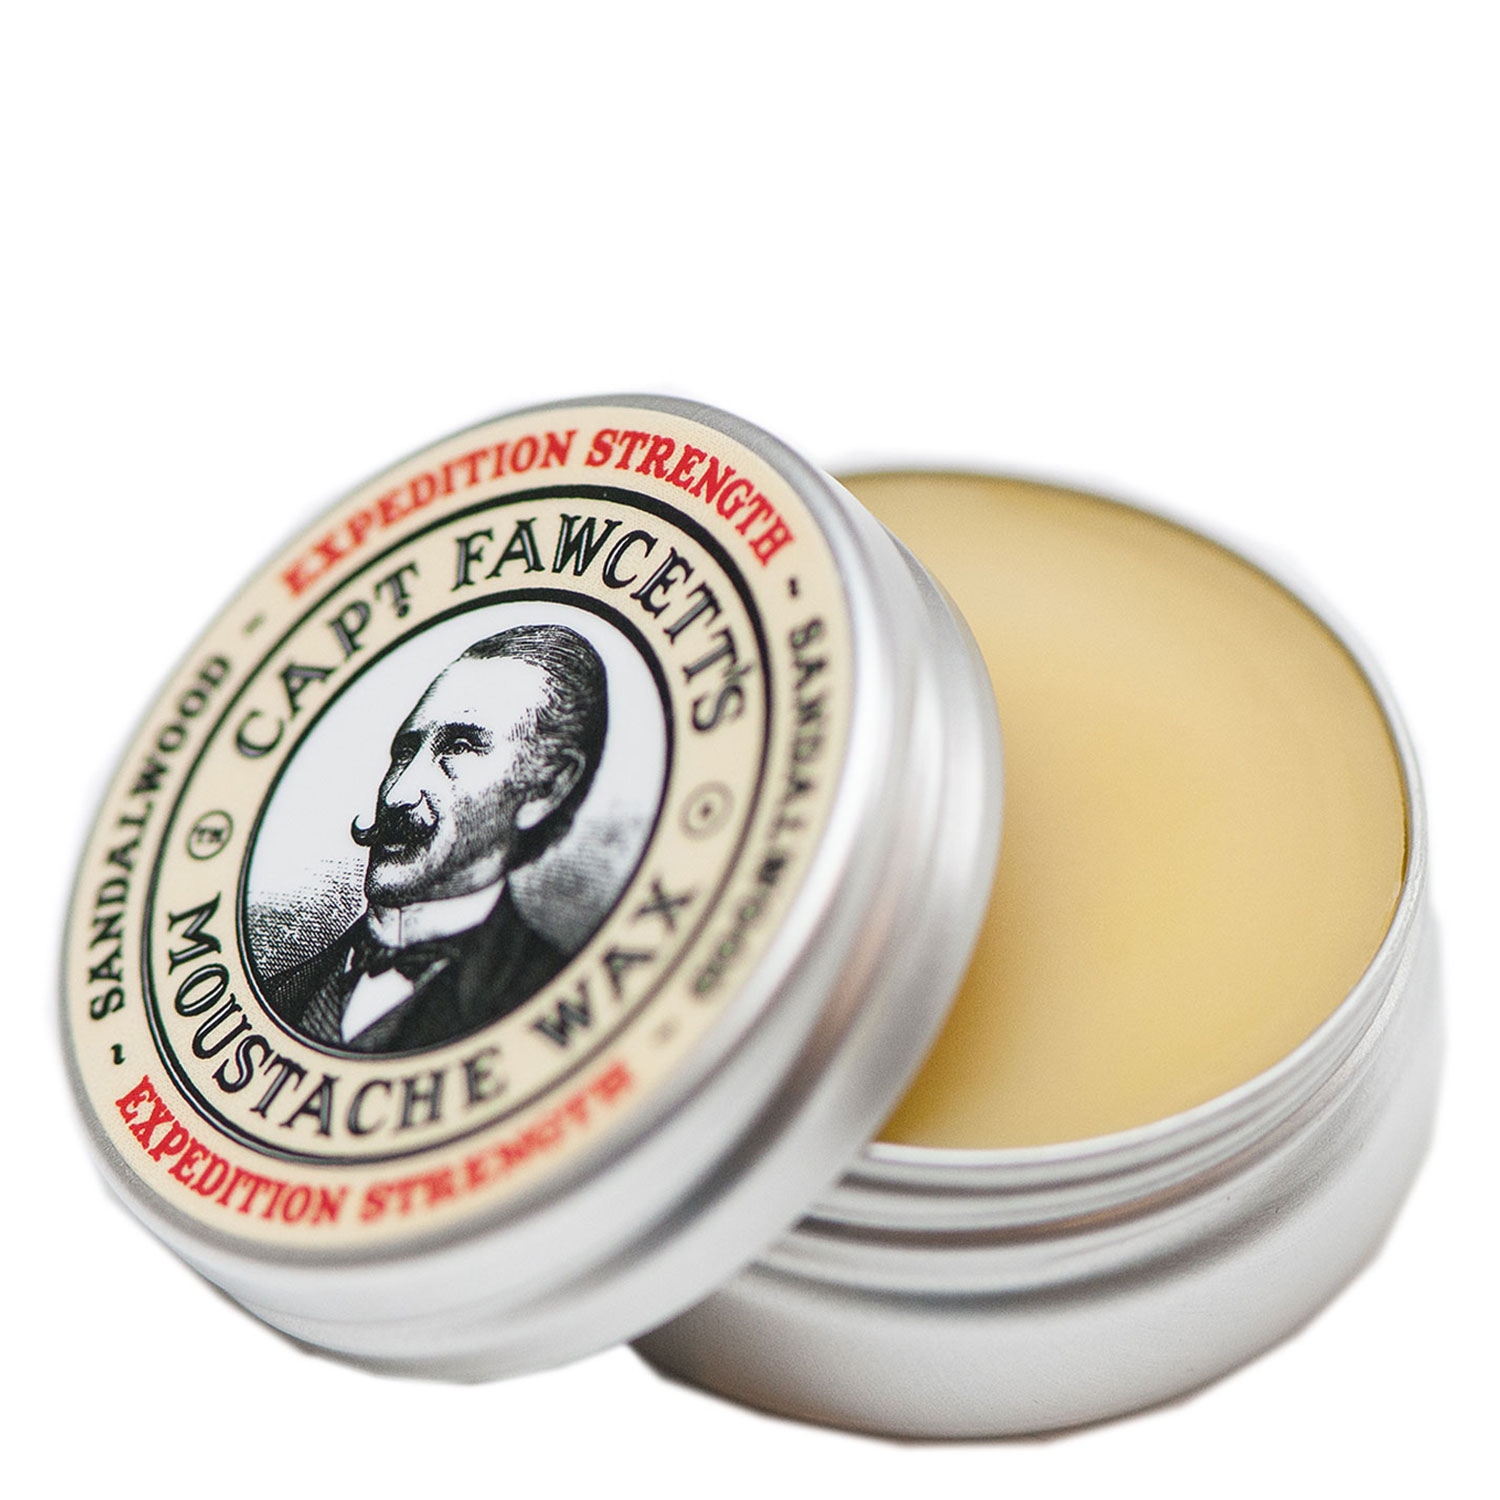 Product image from Capt. Fawcett Care - Expedition Strength Moustache Wax